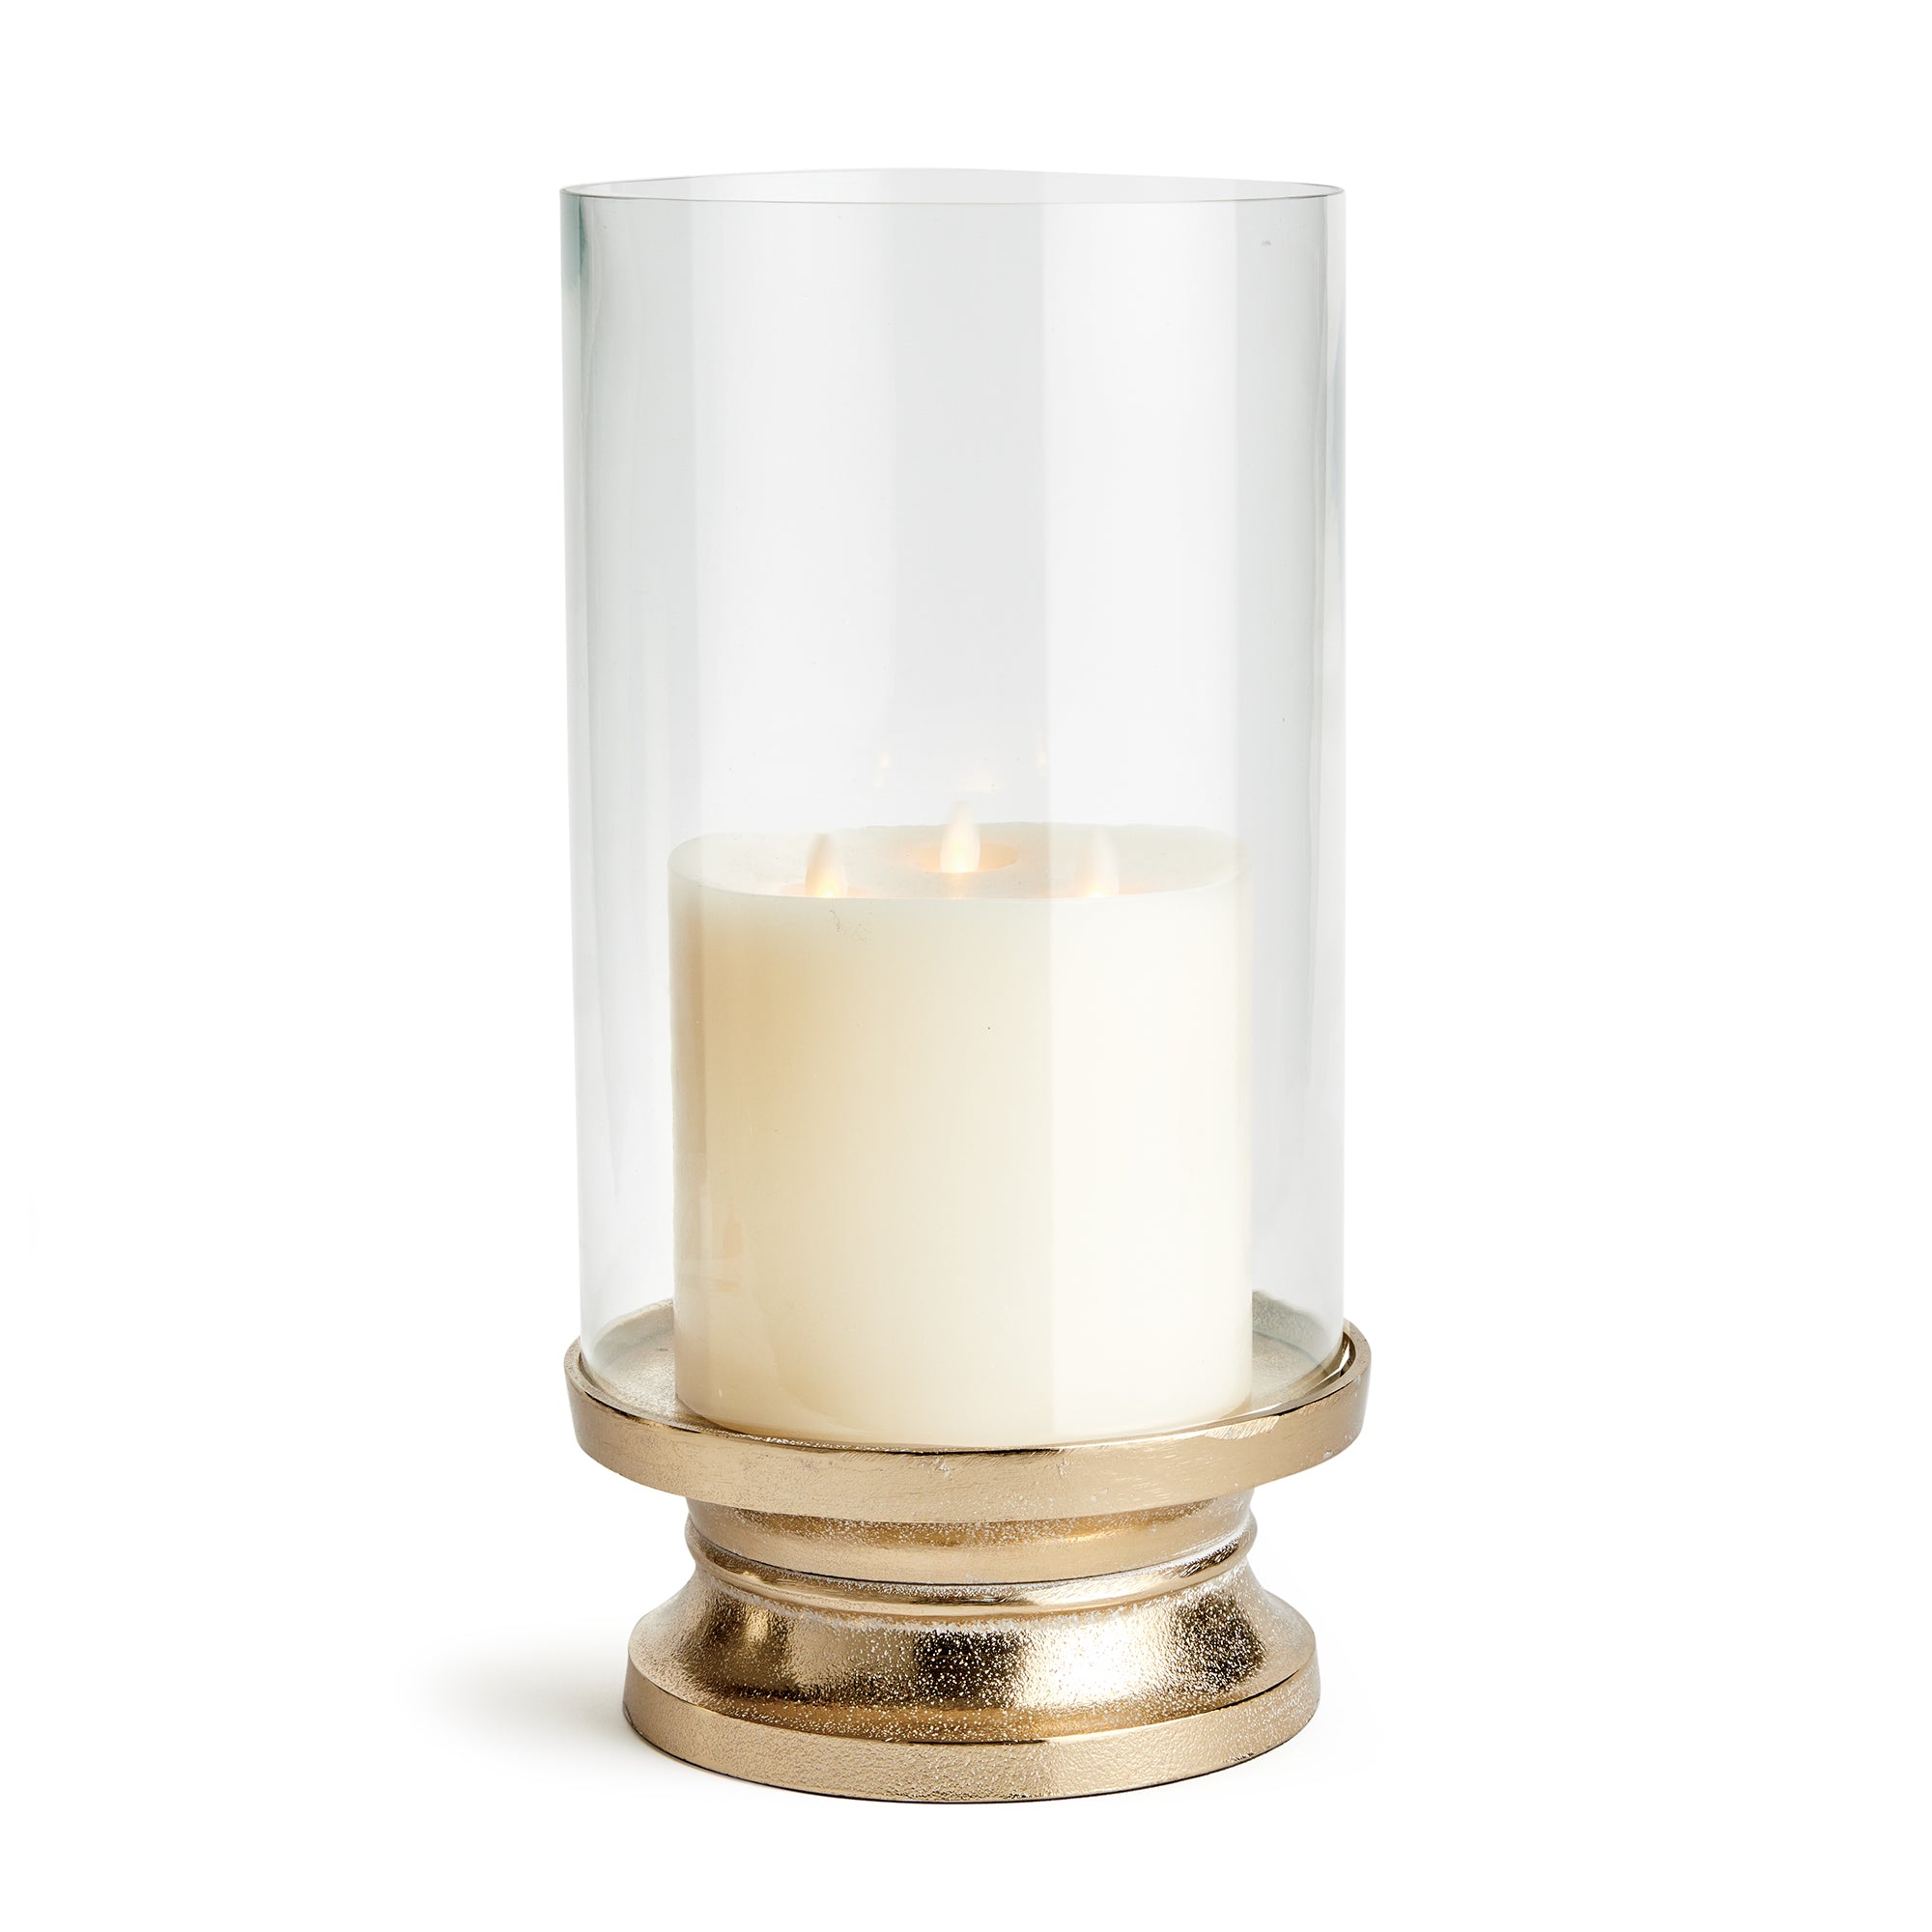 With a traditional silhouette and a snow-on-brass finish, this footed hurricane is at home in the fresh traditional setting. Add a tall pillar candle and enjoy the warm glow. Amethyst Home provides interior design, new construction, custom furniture, and area rugs in the Winter Garden metro area.